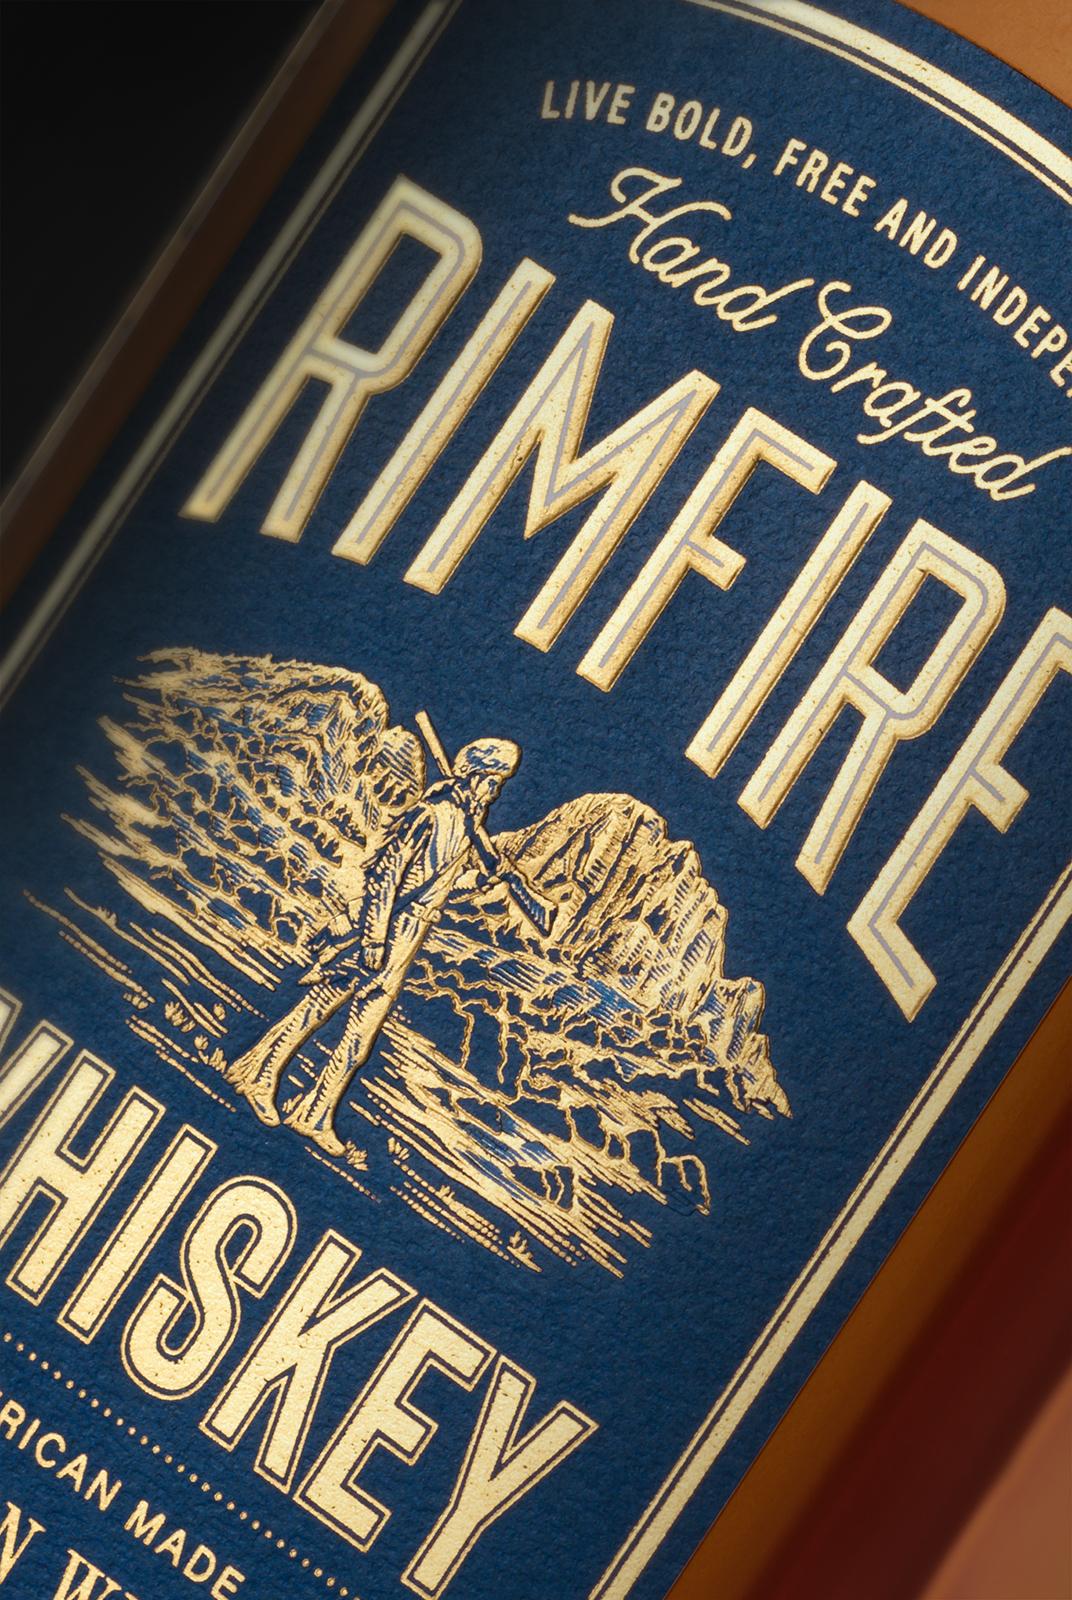 CF Napa Captures the Spirit of West Virginia with Rimfire Whiskey Packaging Design